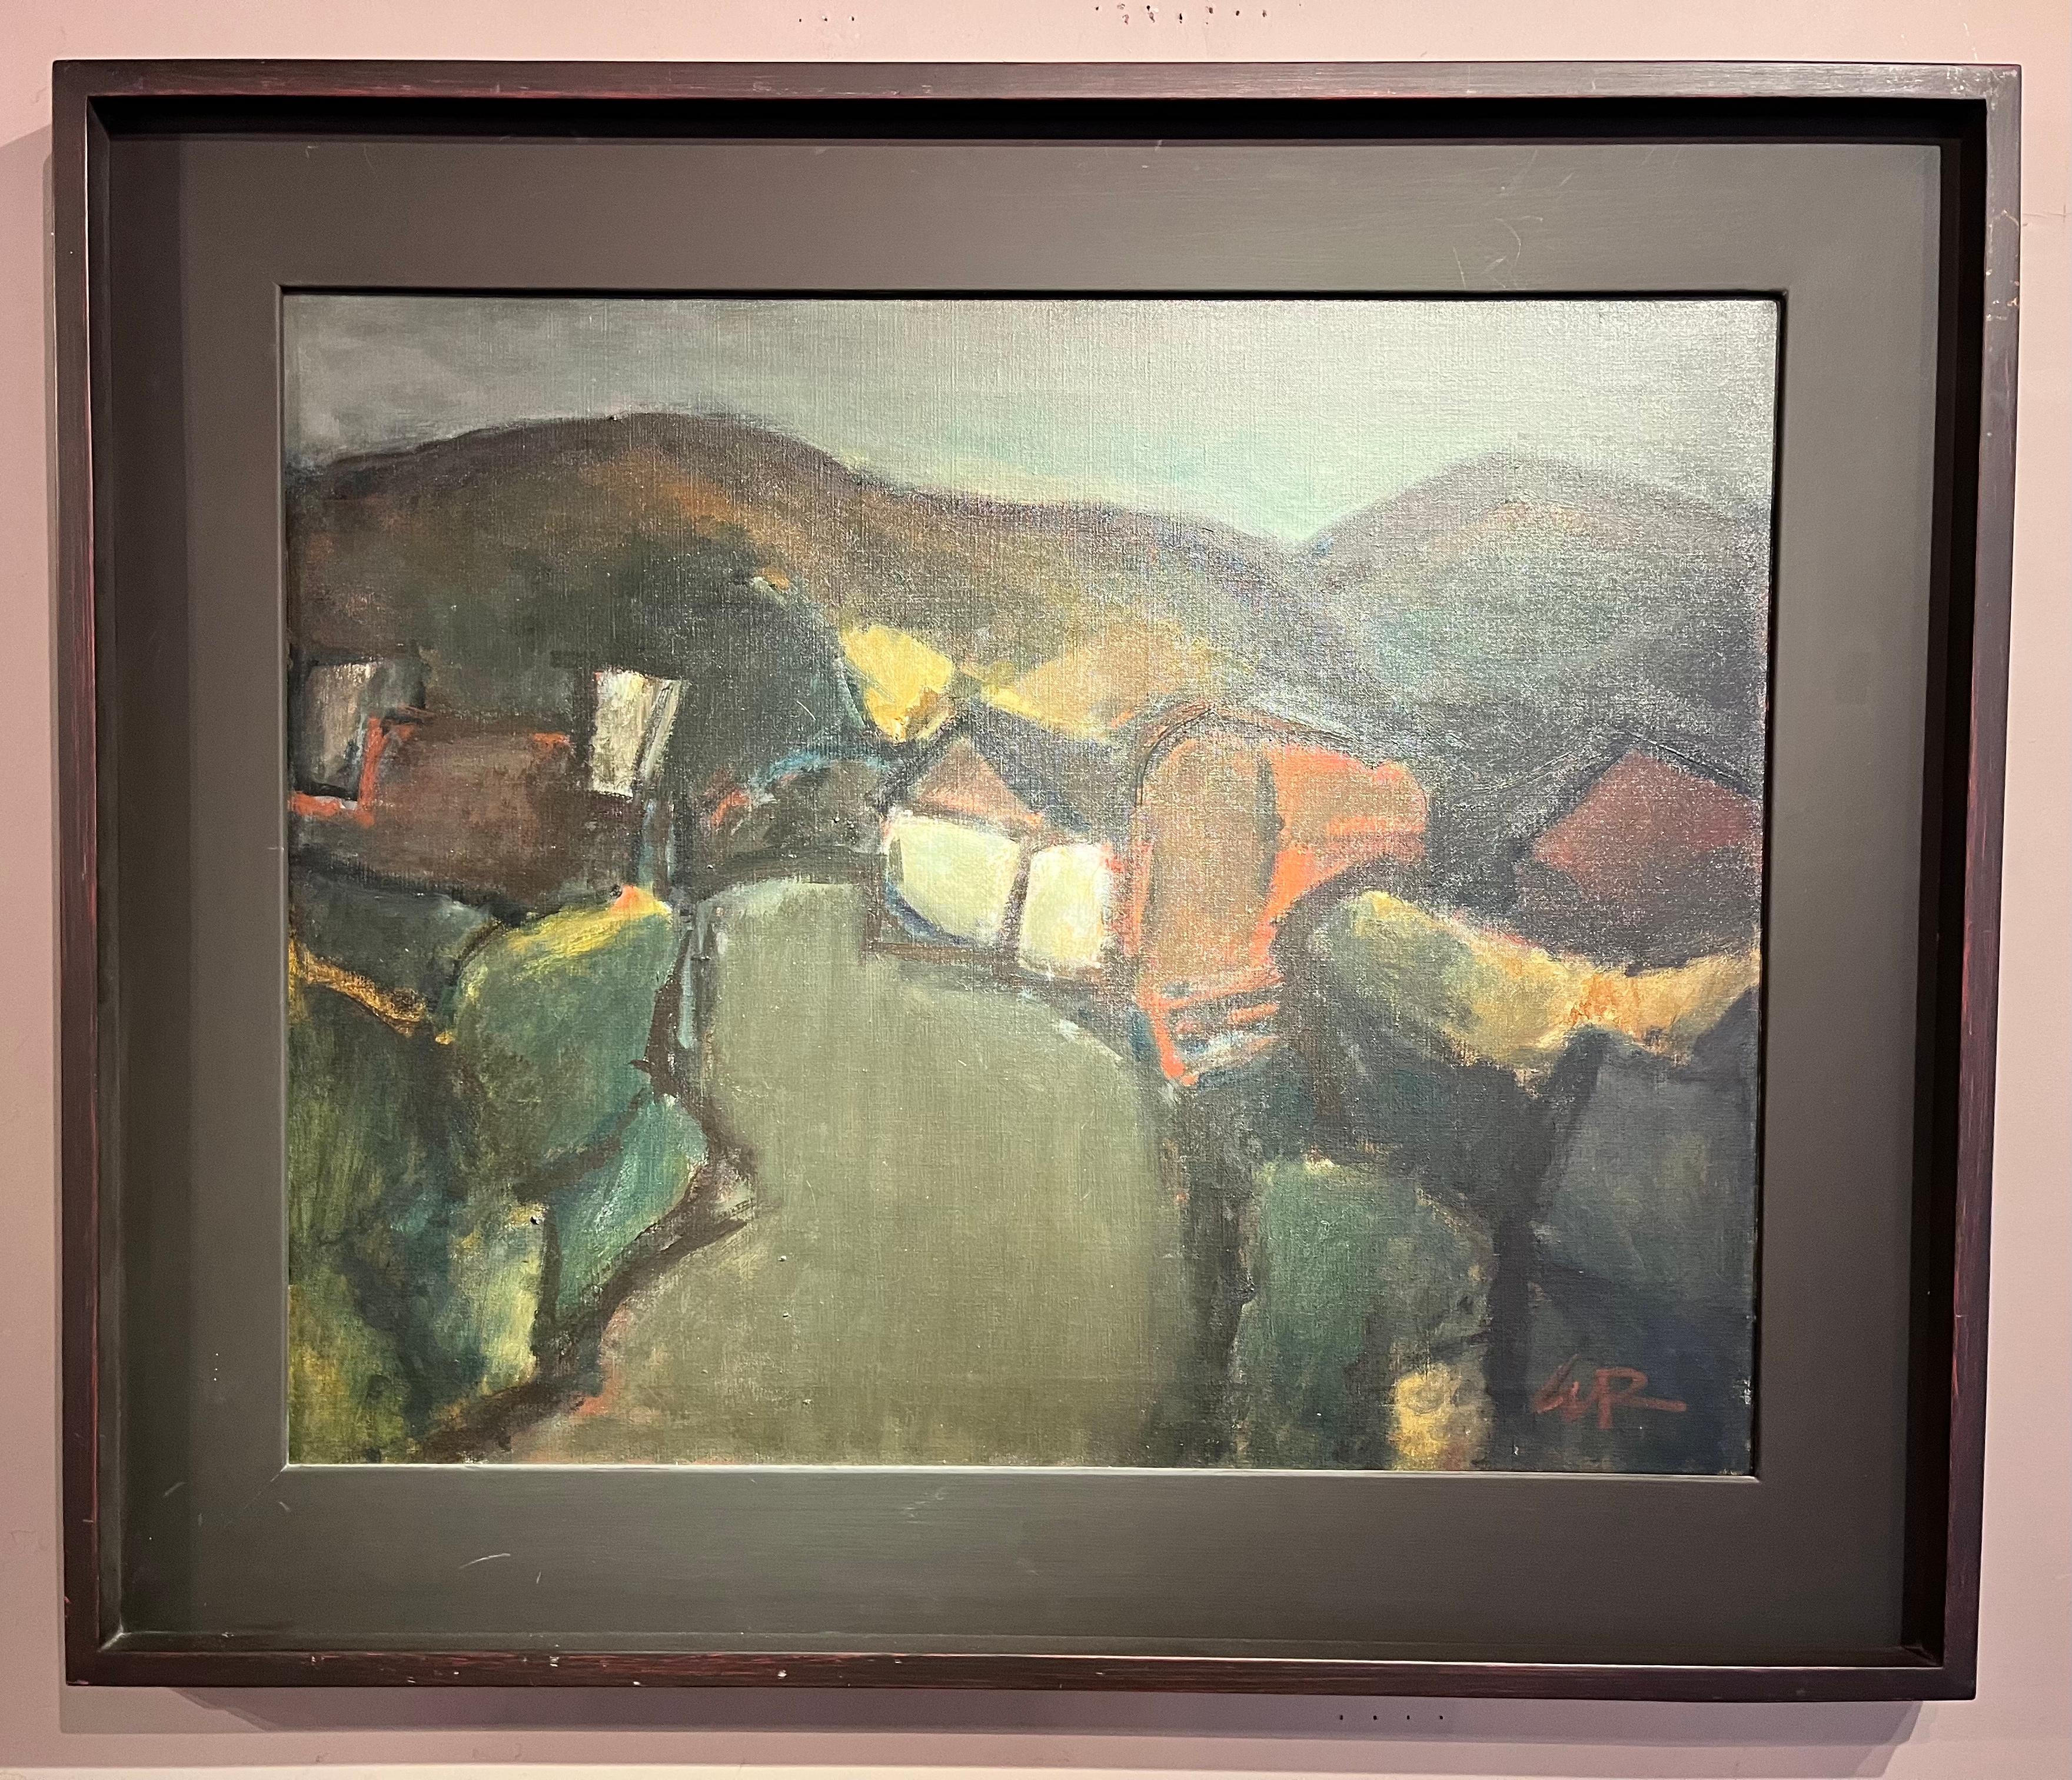 Will Roberts Landscape Painting - 'Red Barn' Dark Atmospheric painting of a welsh landscape, building, hills